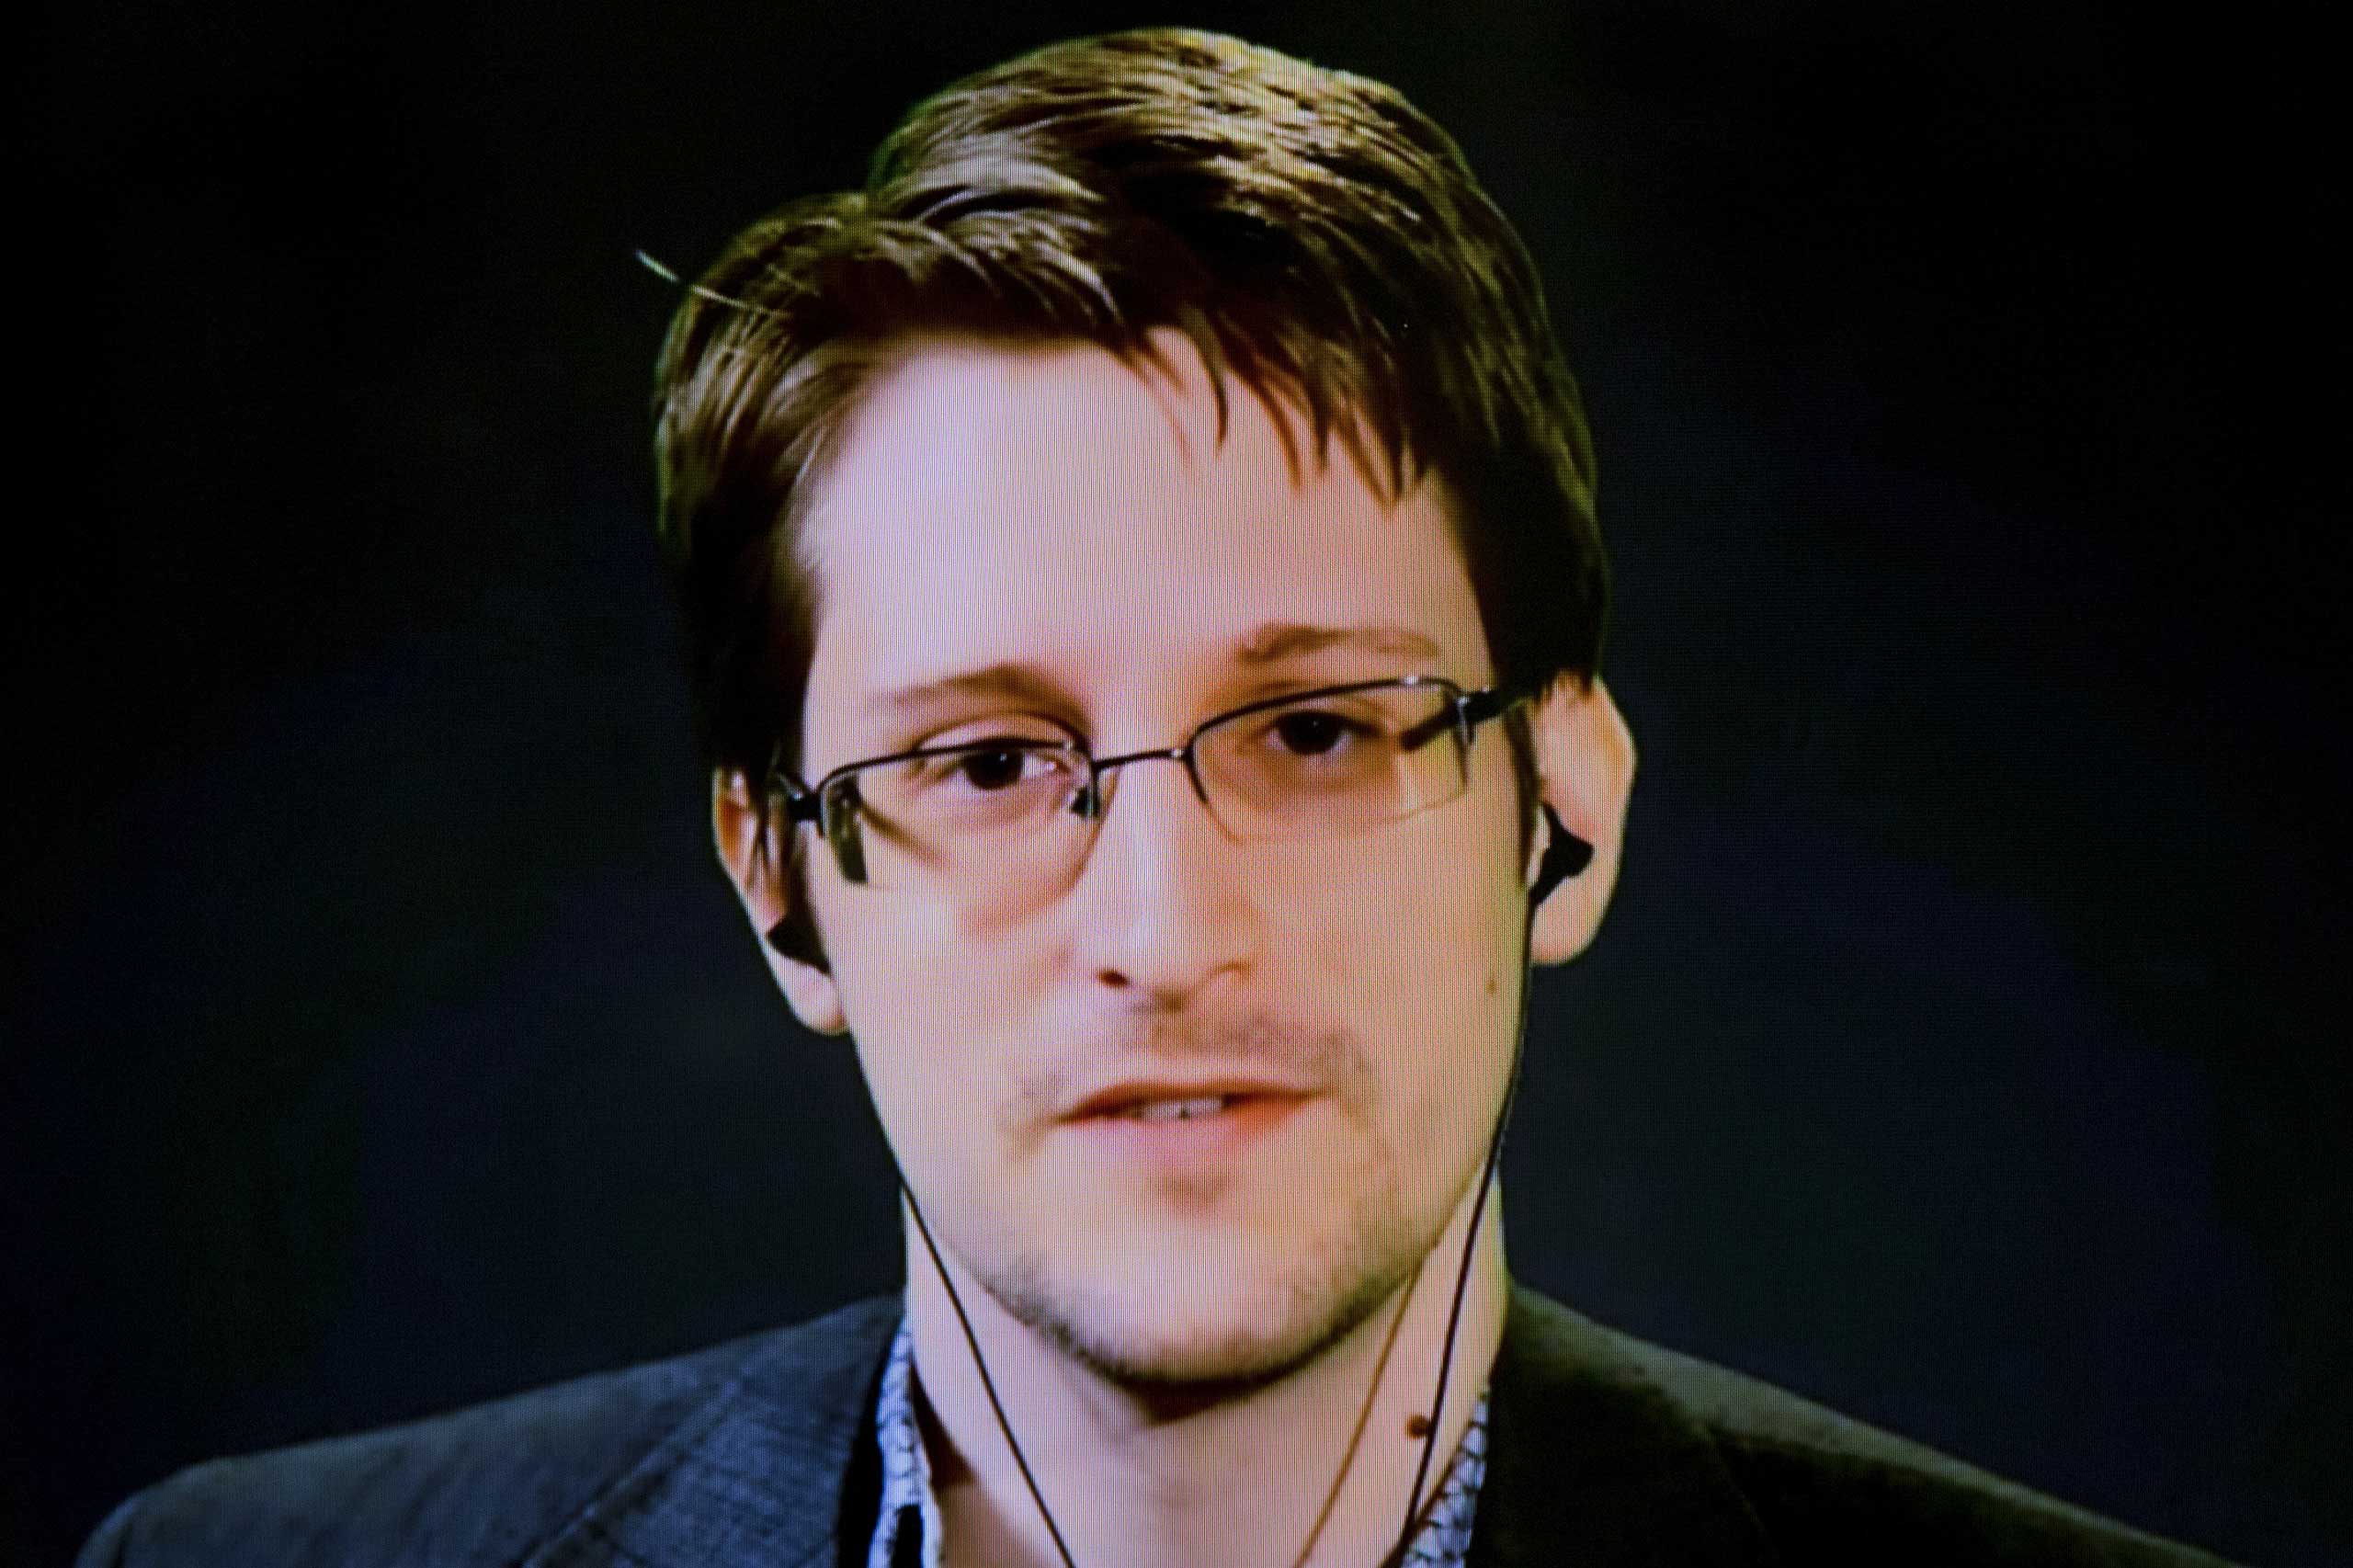 American whistleblower Snowden via video link from Moscow regarding International Treaty on the Right to Privacy, Protection Against Improper Surveillance and Protection of Whistleblowers in New York